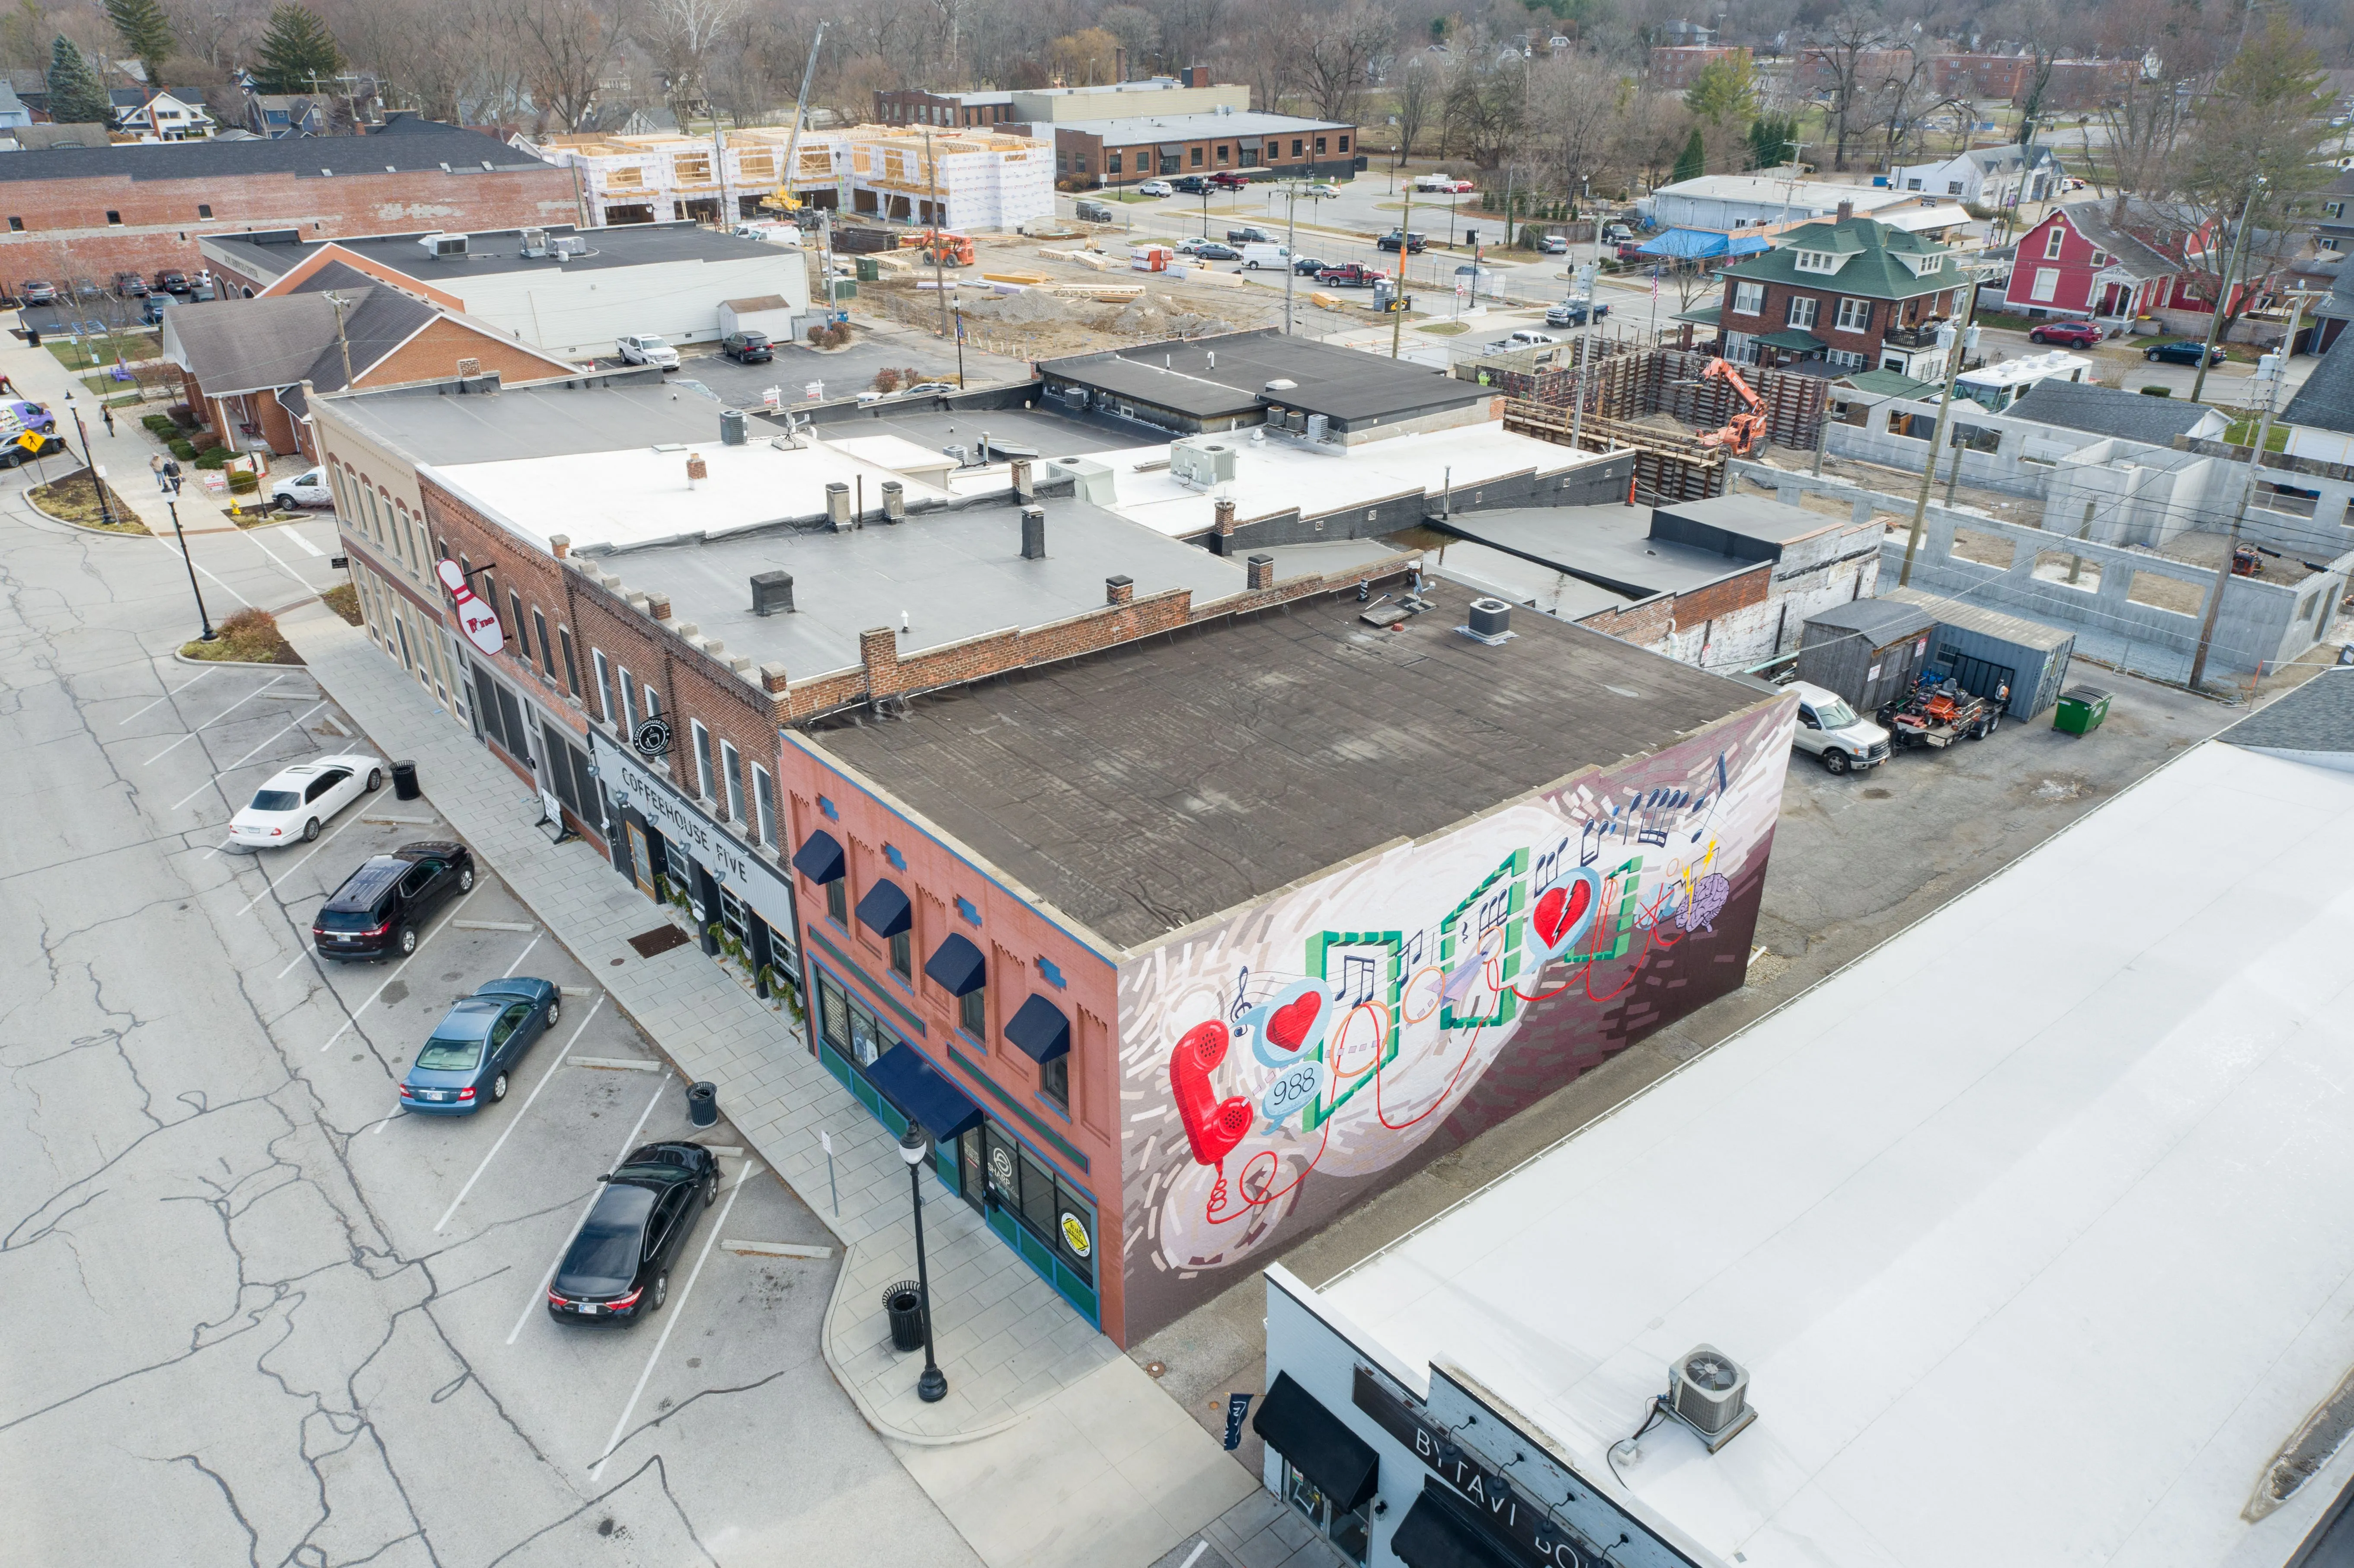 Aerial view of a city block with a building featuring graffiti art, surrounded by cars and adjacent buildings.